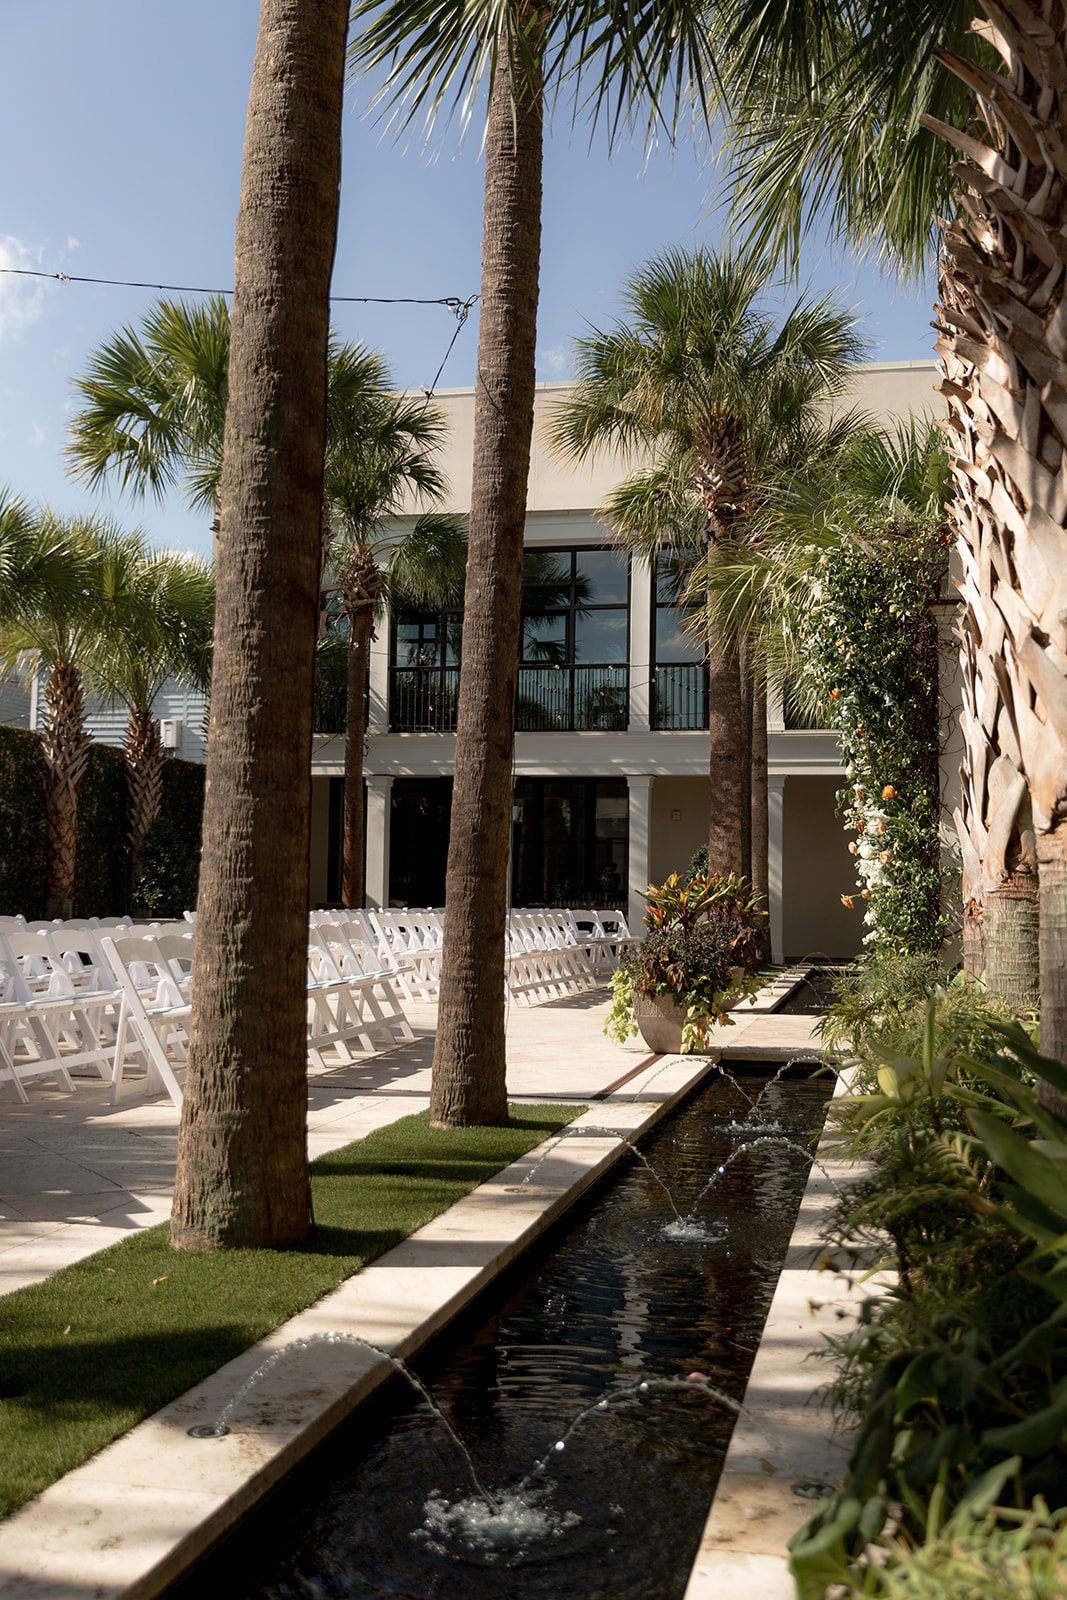 Wedding ceremony setup at Cannon Green showing palm trees and white chairs